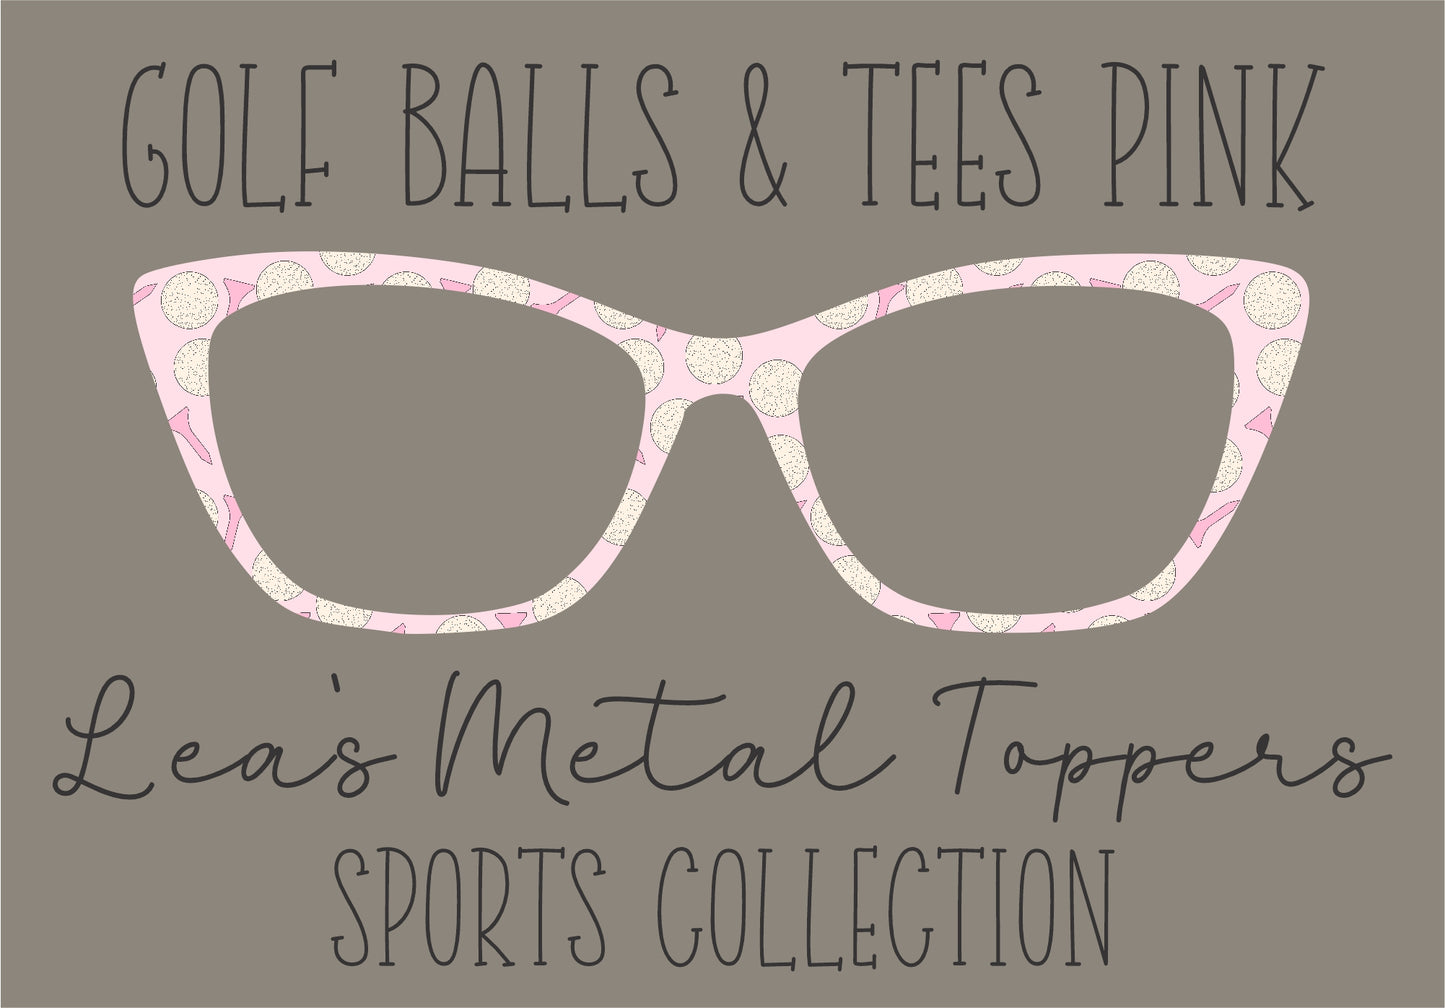 GOLF BALL AND TEES PINK Eyewear Frame Toppers COMES WITH MAGNETS